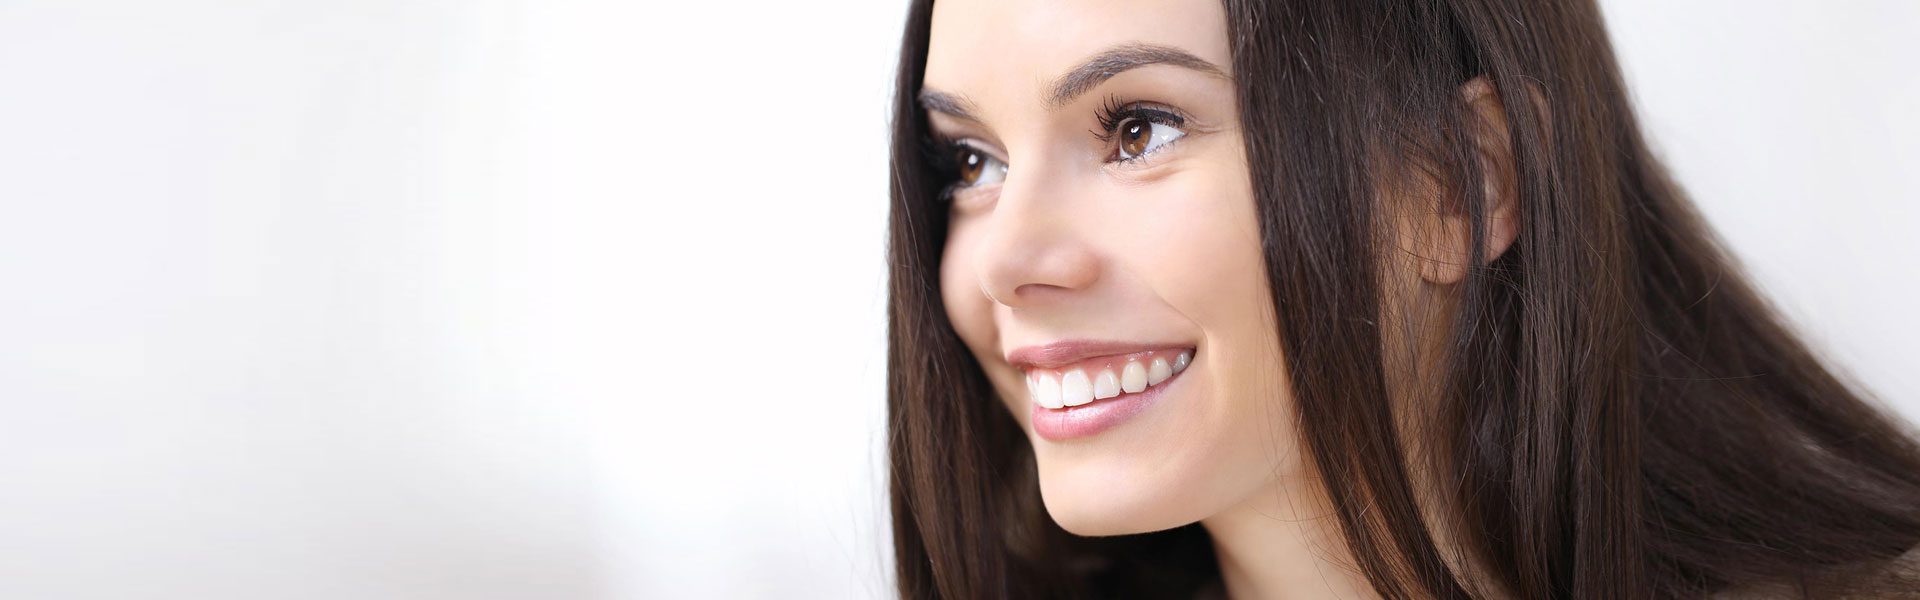 How To Care For Your Veneers